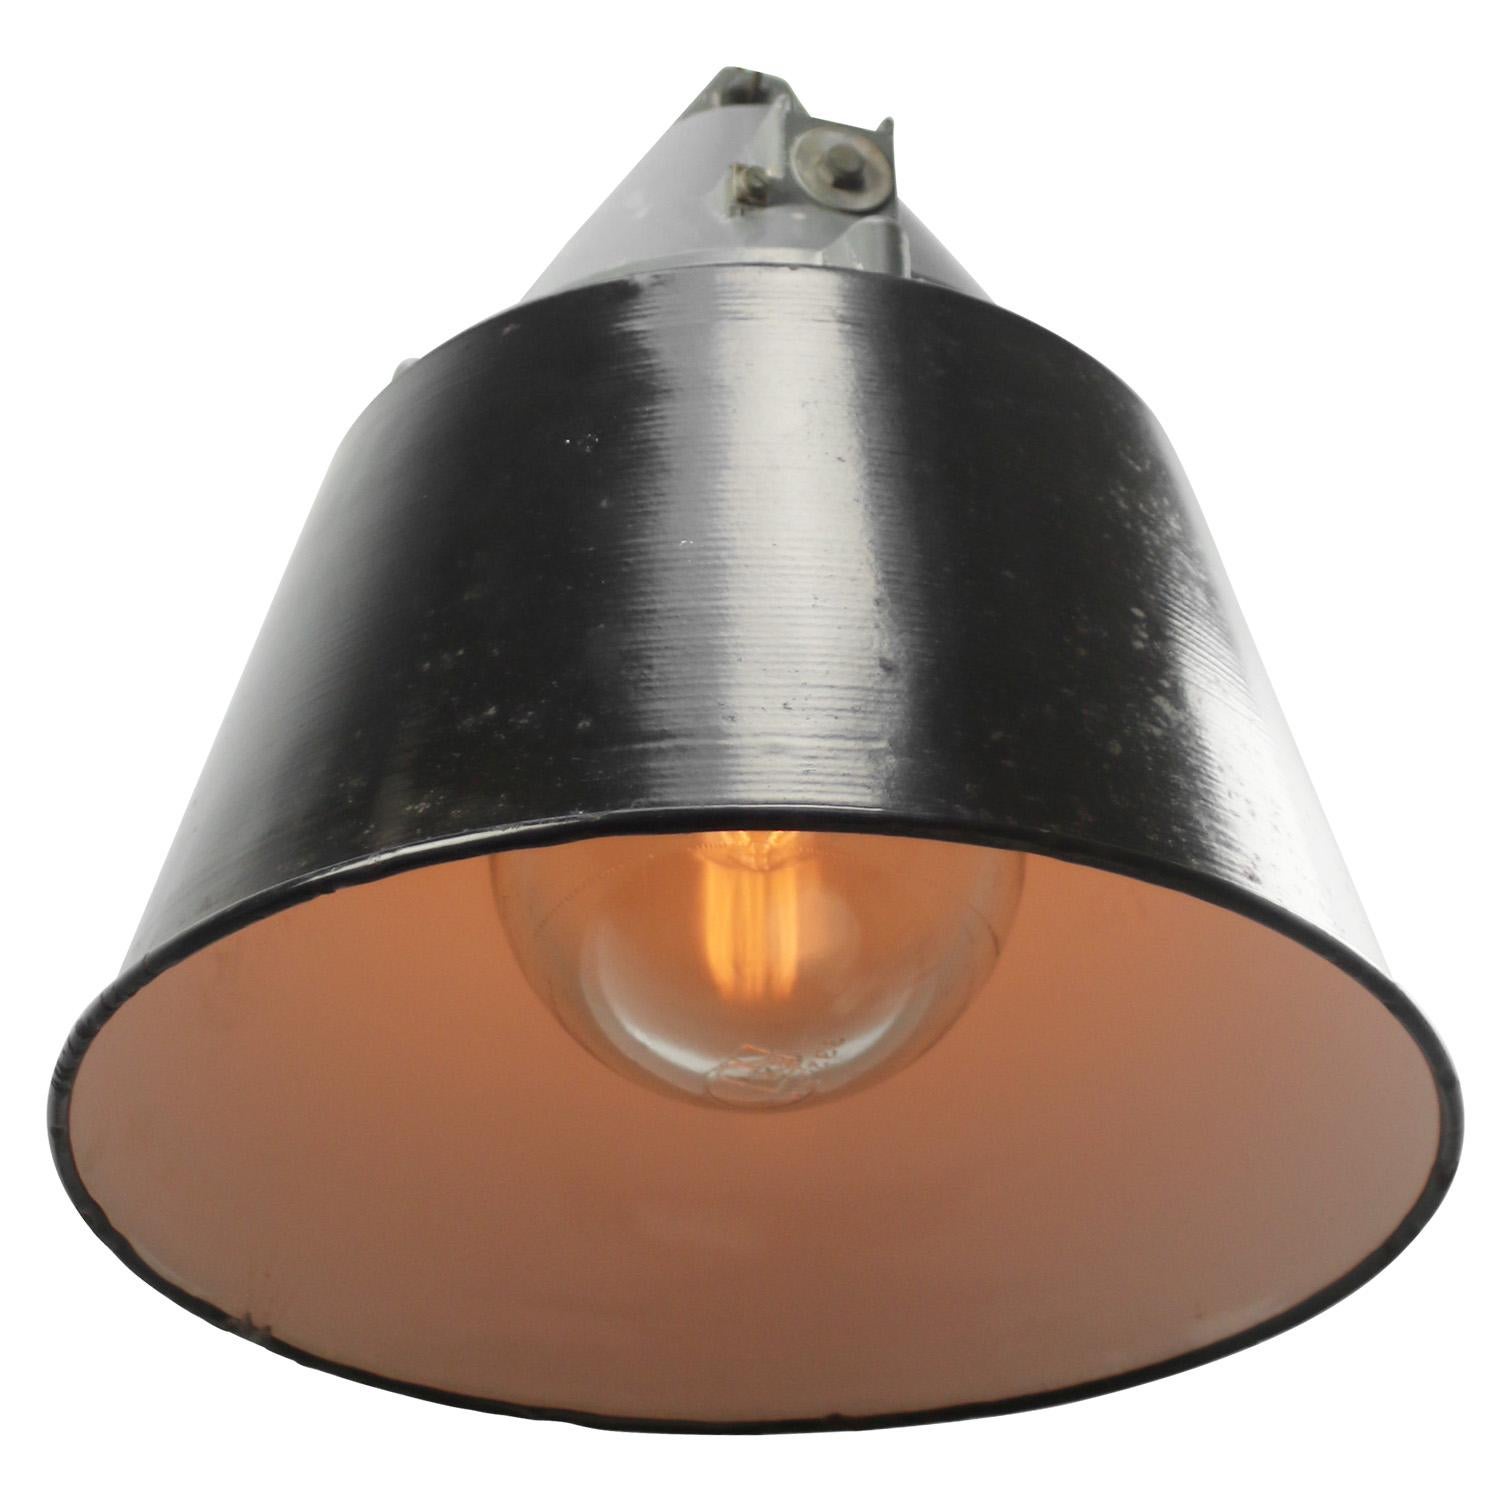 Black enamel vintage industrial pendant light
Cast aluminium top with clear glass

Weight: 7.00 kg / 15.4 lb

Priced per individual item. All lamps have been made suitable by international standards for incandescent light bulbs, energy-efficient and